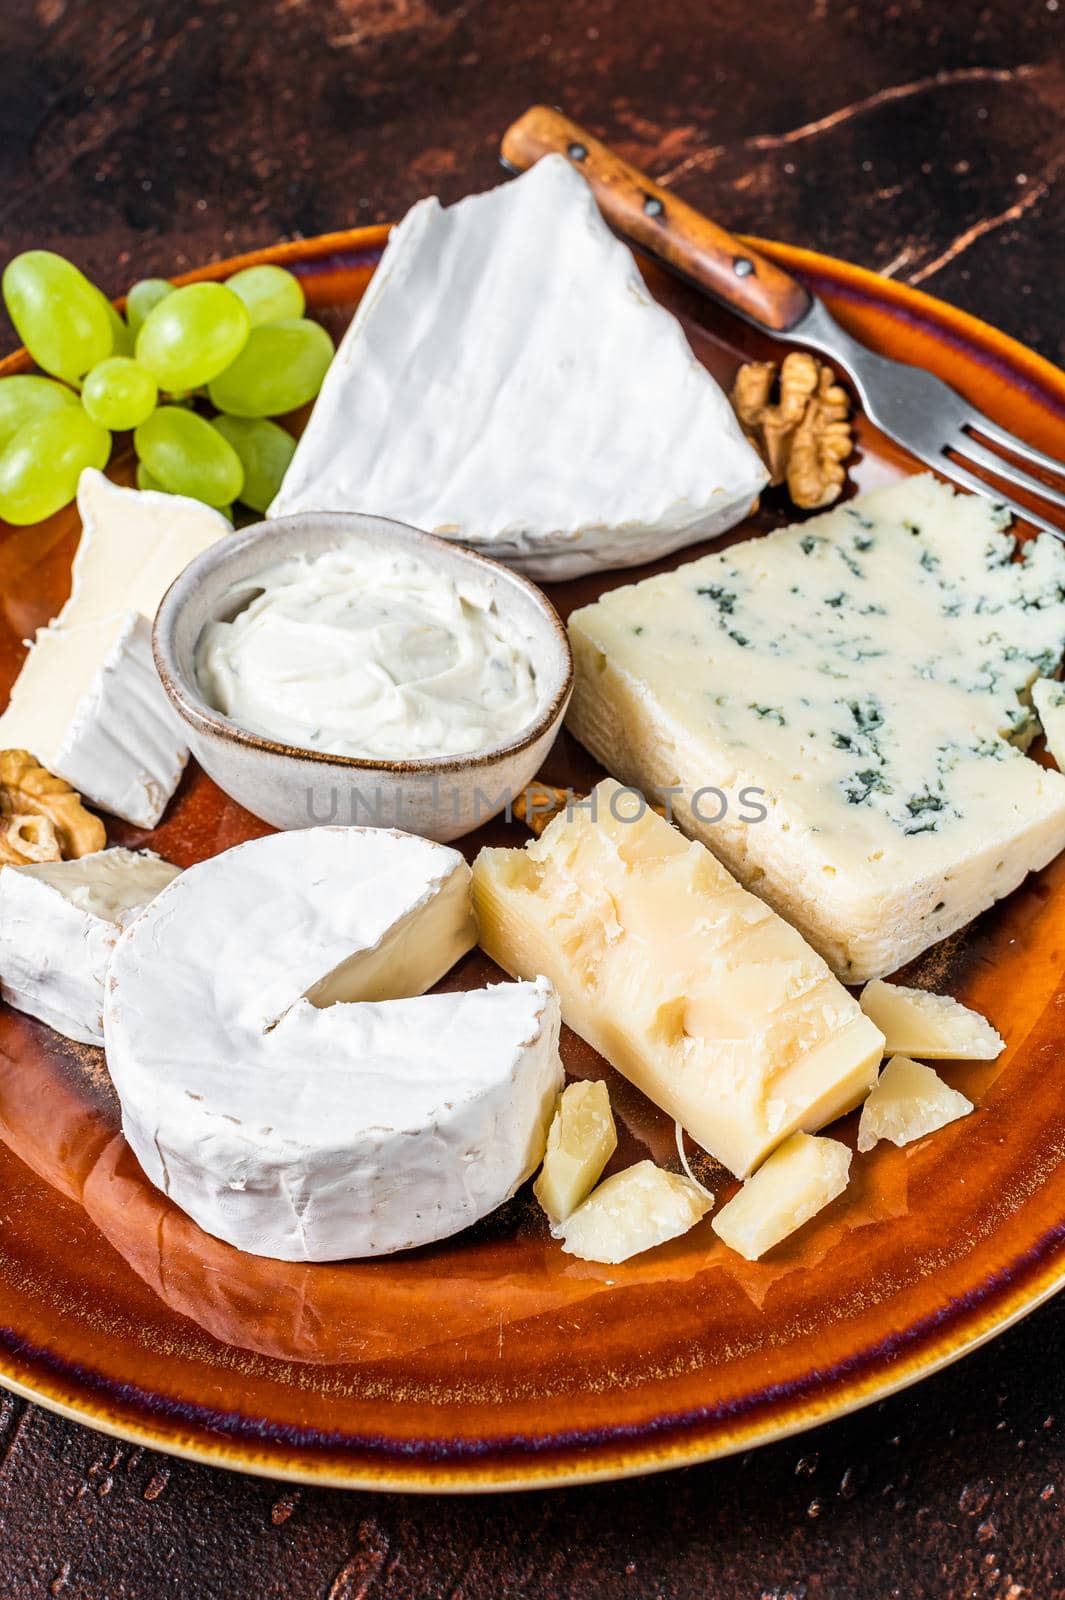 Cheese plate with Brie, Camembert, Roquefort, blue cream cheese, grape and nuts. Dark background. Top view.